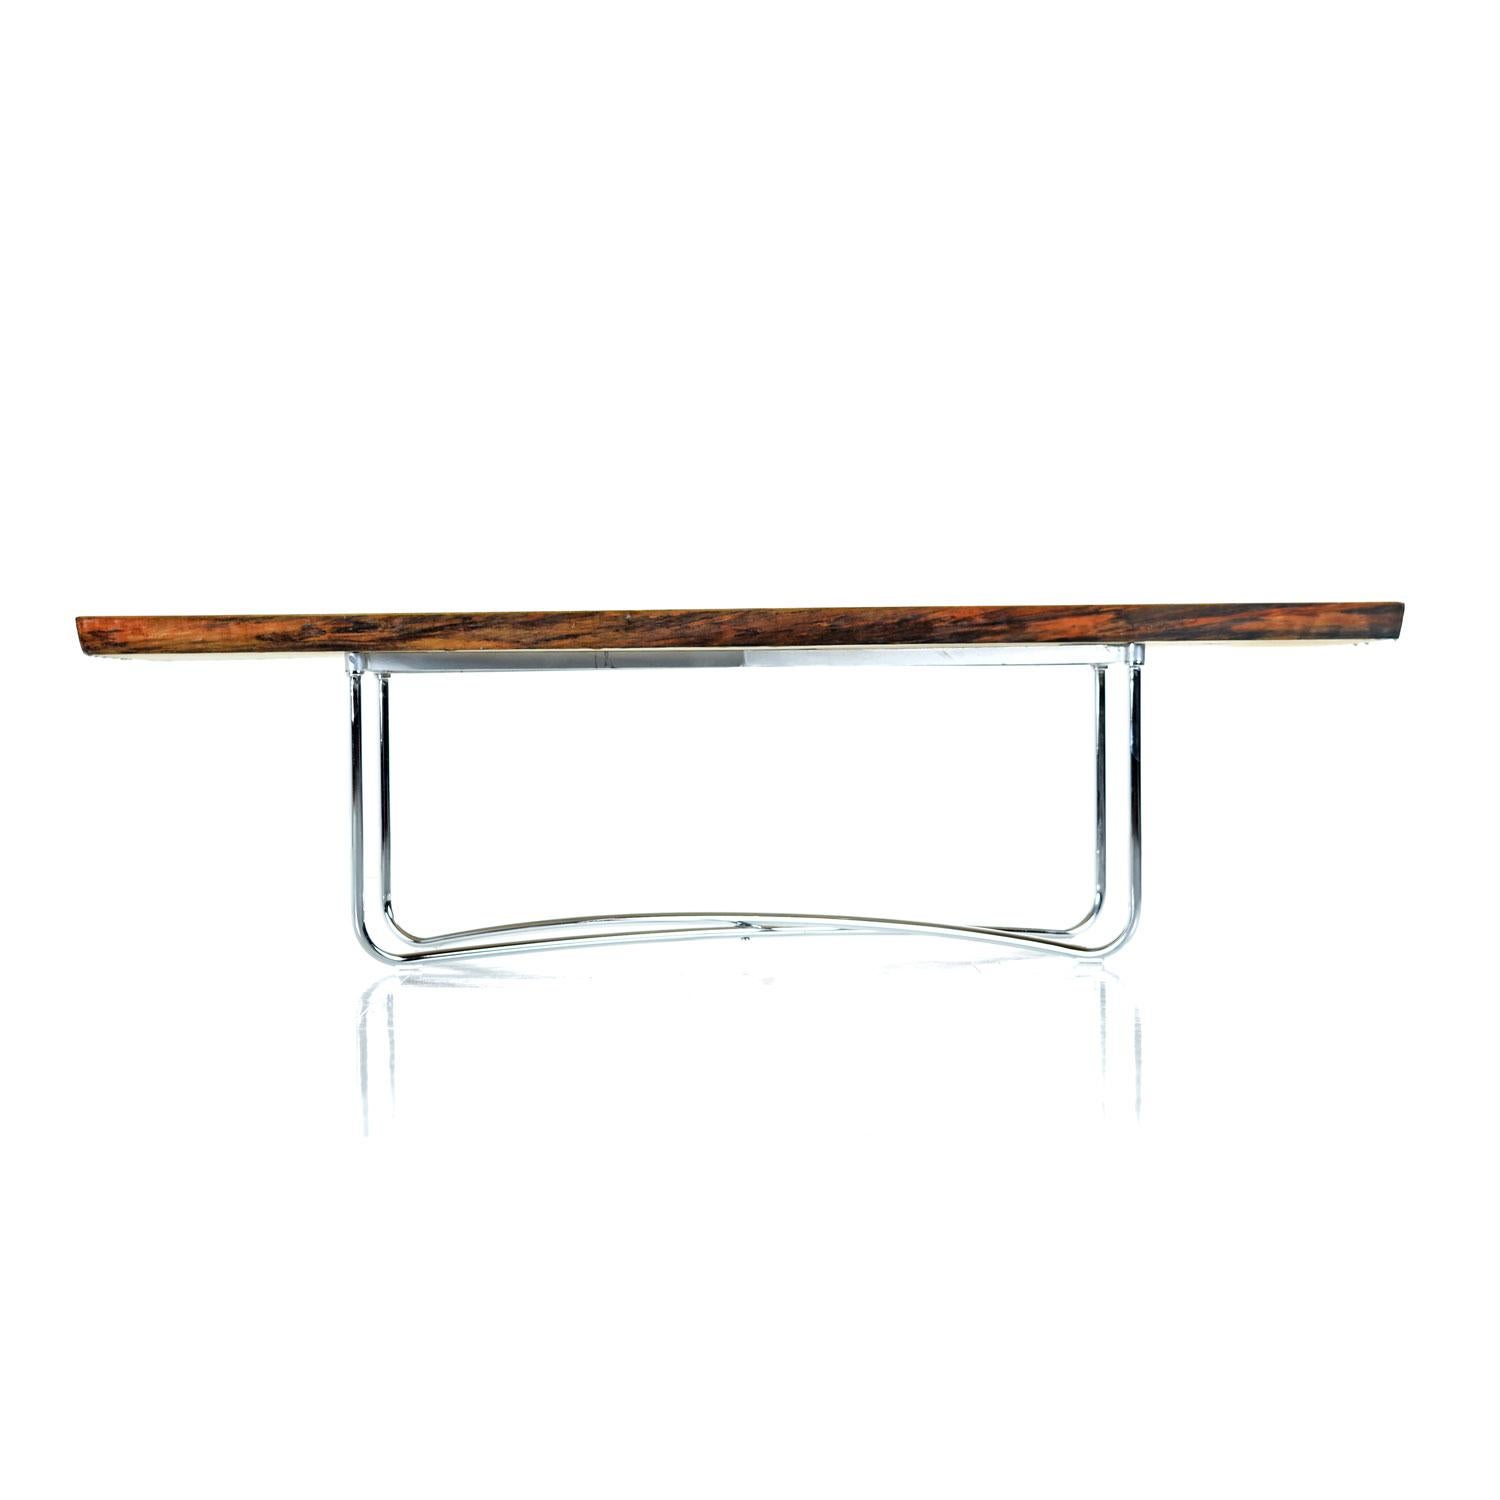 Spectacular live edge, pine plank coffee table bench. The aged pine has been renewed with a freshly poured, scratch free resin surface. The naturally formed knots and variations in the wood have smoothed over like glass. The edges are raw, unaltered